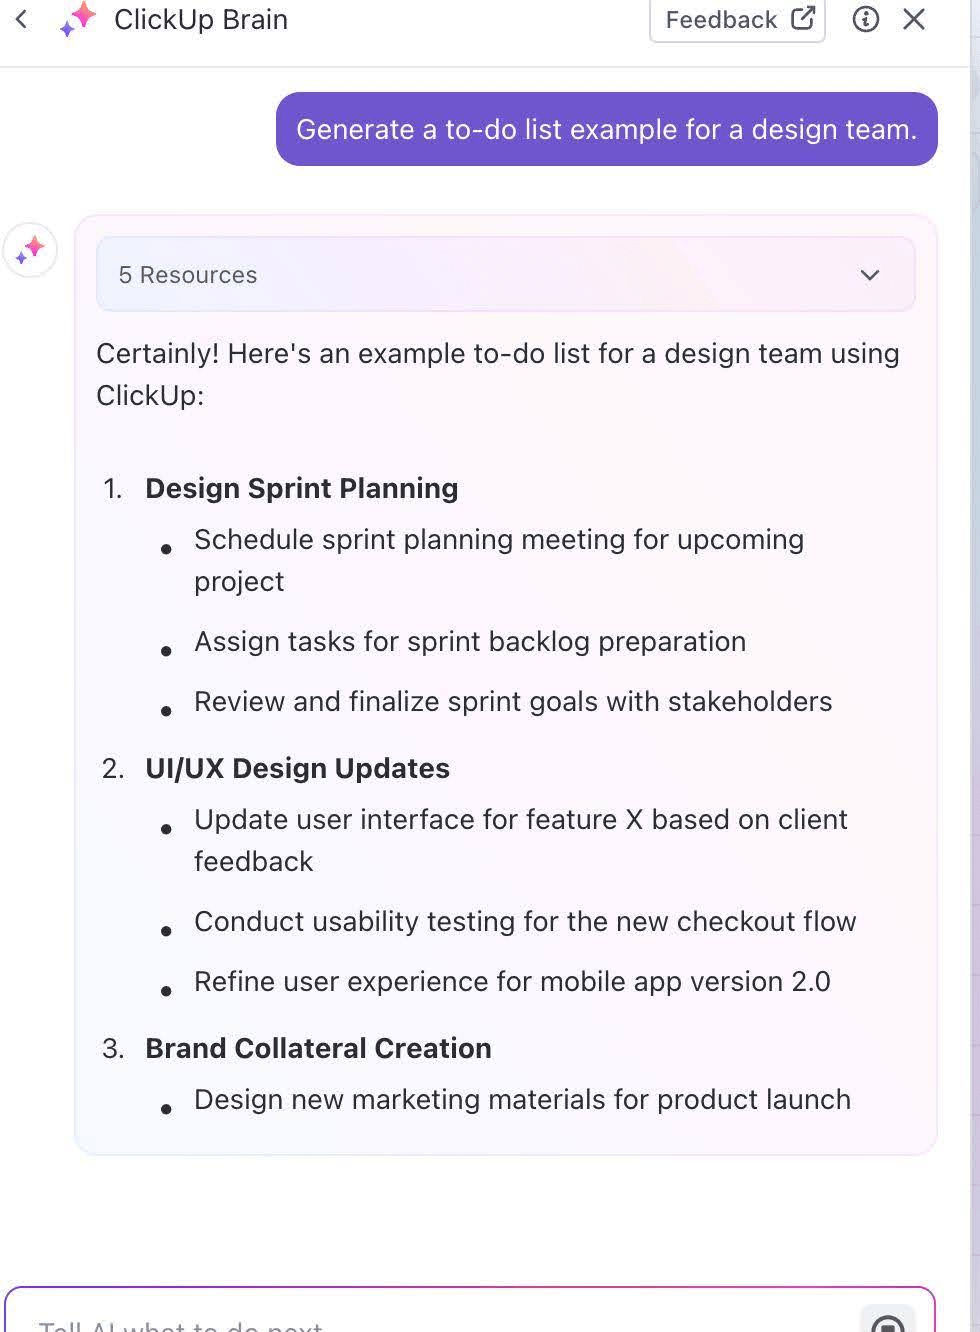 Design to-do list example via ClickUp Brain:
Design Sprint Planning
UI/UX Design Updates
Brand Collateral Creation